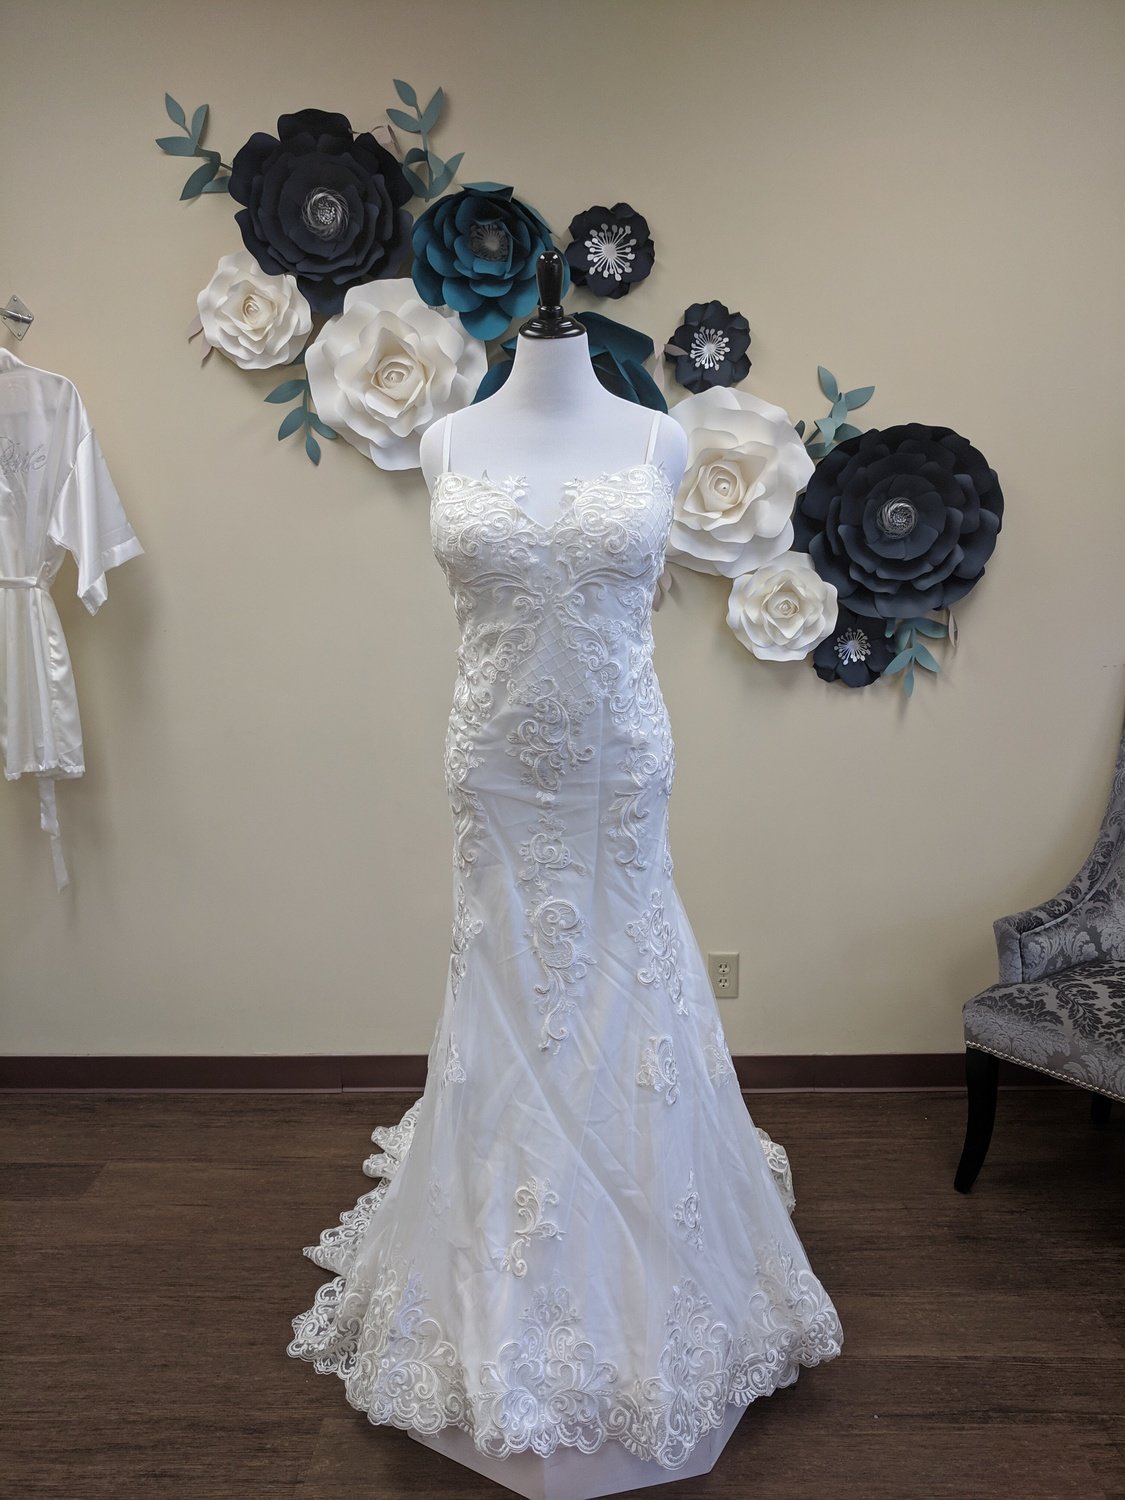 Spaghetti Strap Gown with Lace Detail Sample Size 24w